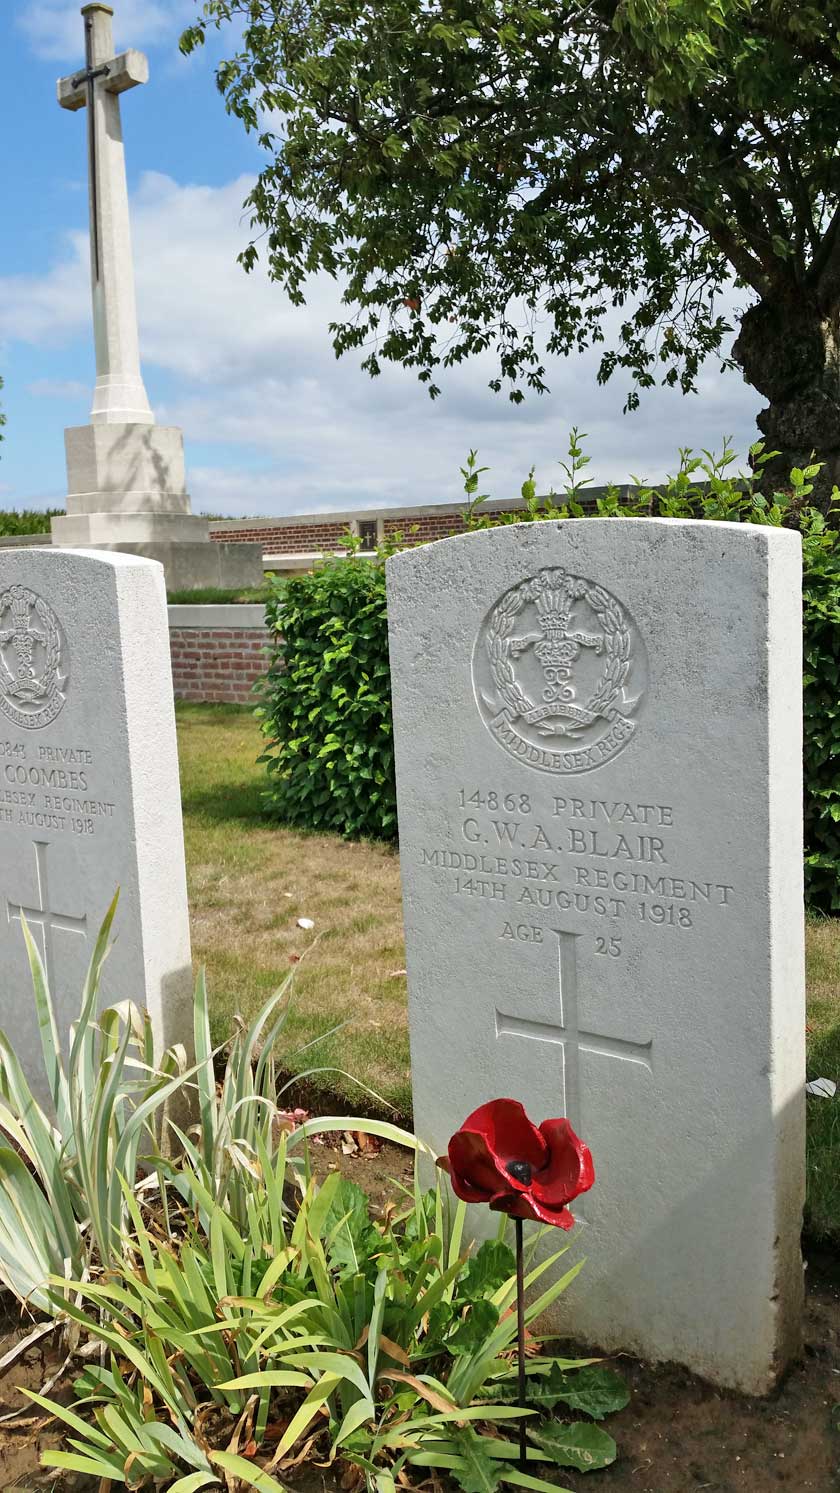 The final resting place of George William Alfred Blair: St Amand British Cemetery, Pas de Calais, France 